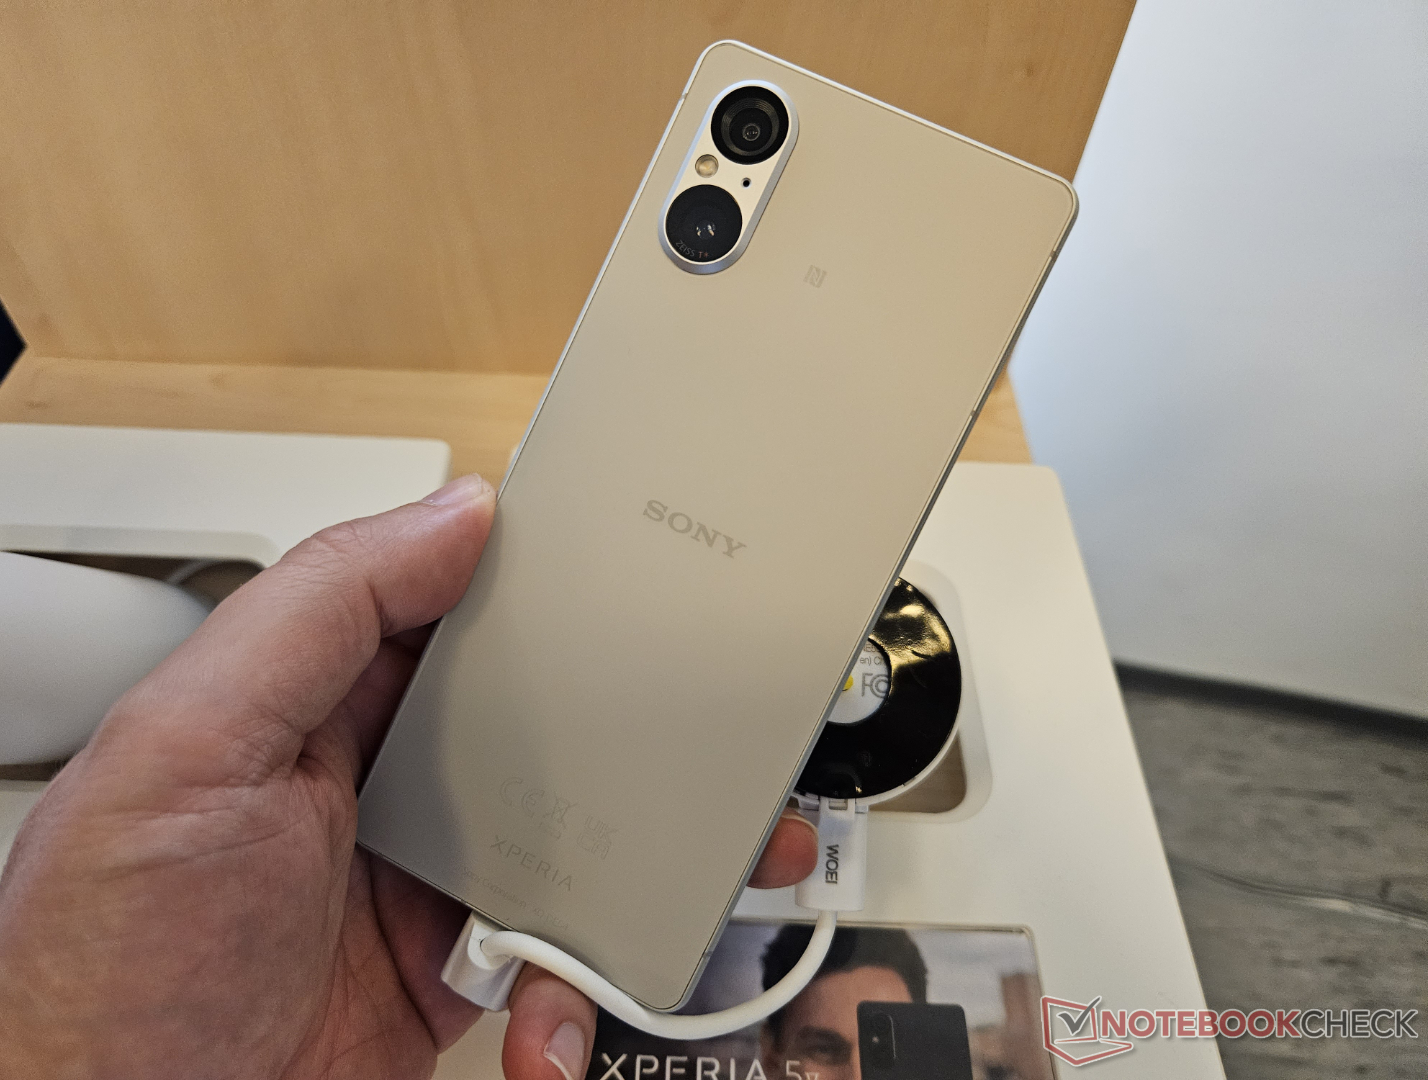 Sony Xperia 5 V: New compact flagship launches with Snapdragon 8